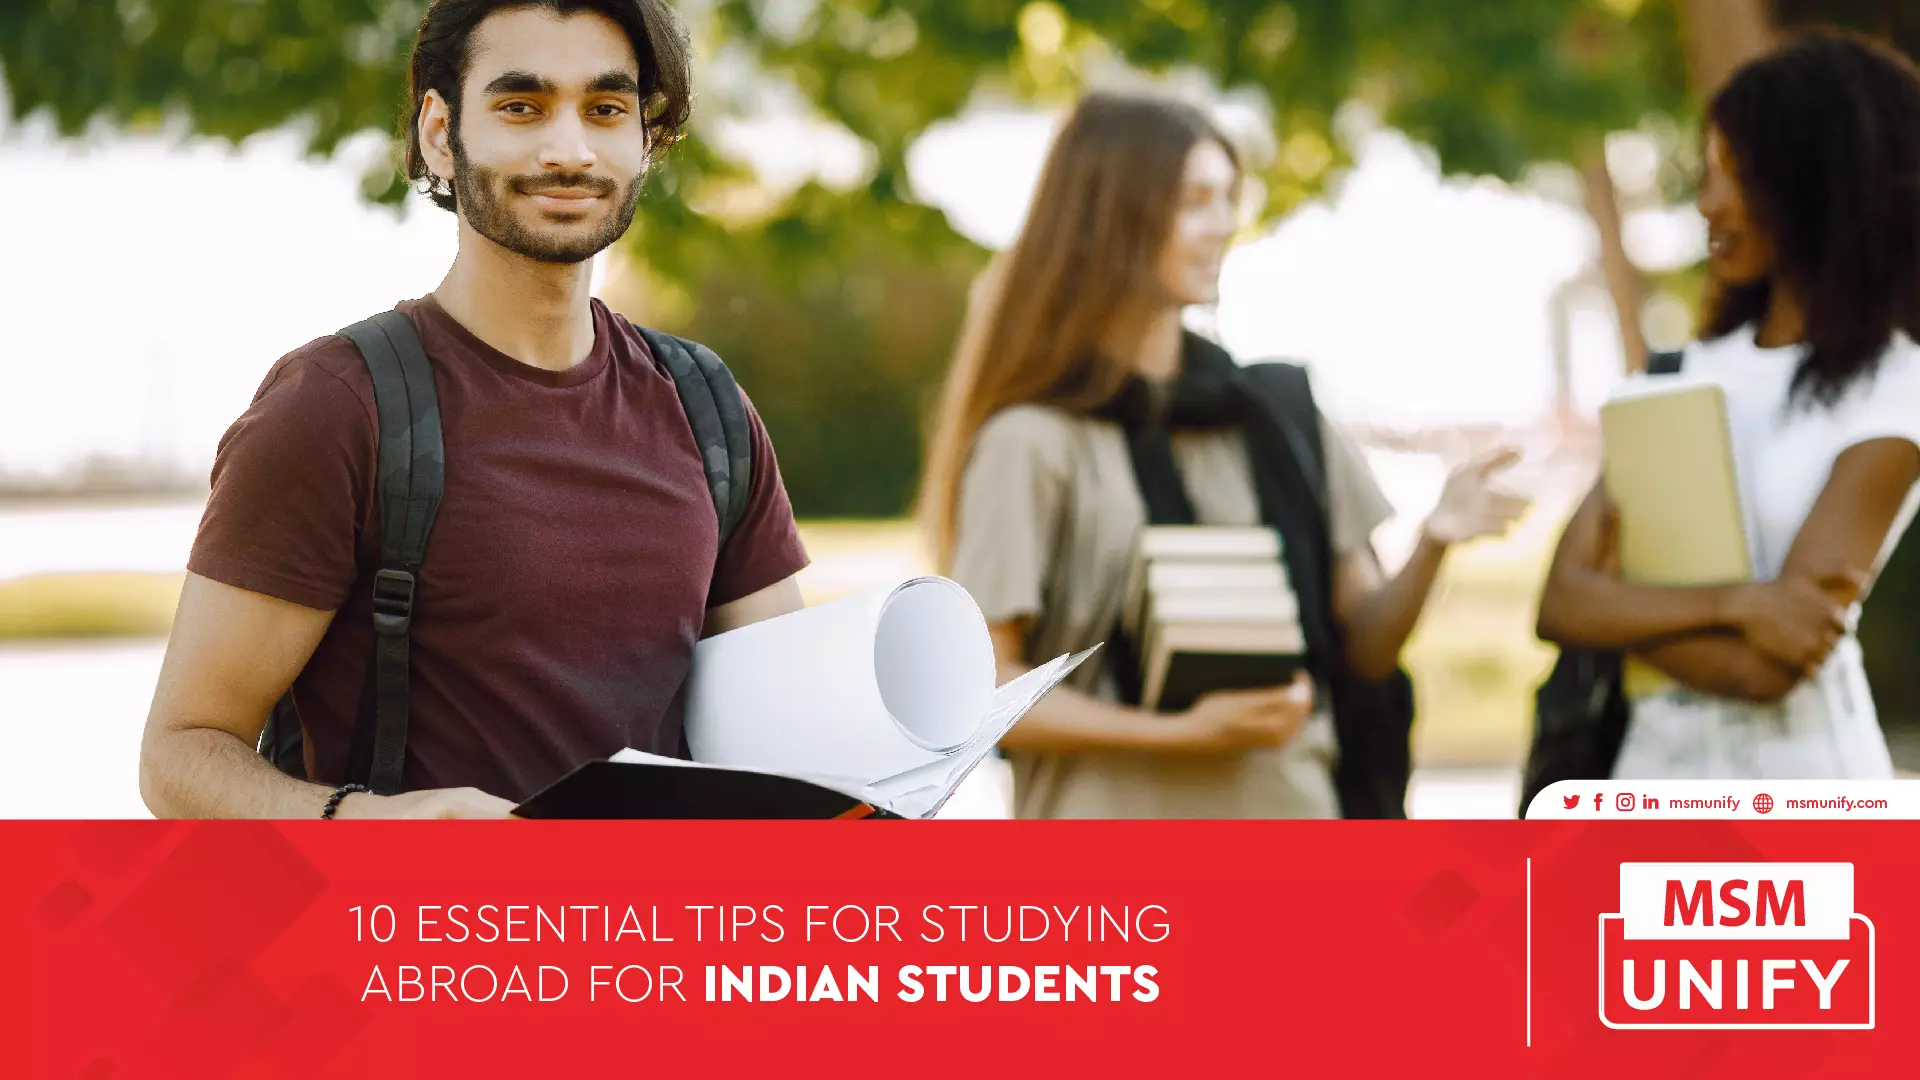 111622 MSM Unify  10 Essential Tips for Studying Abroad for Indian Students 01